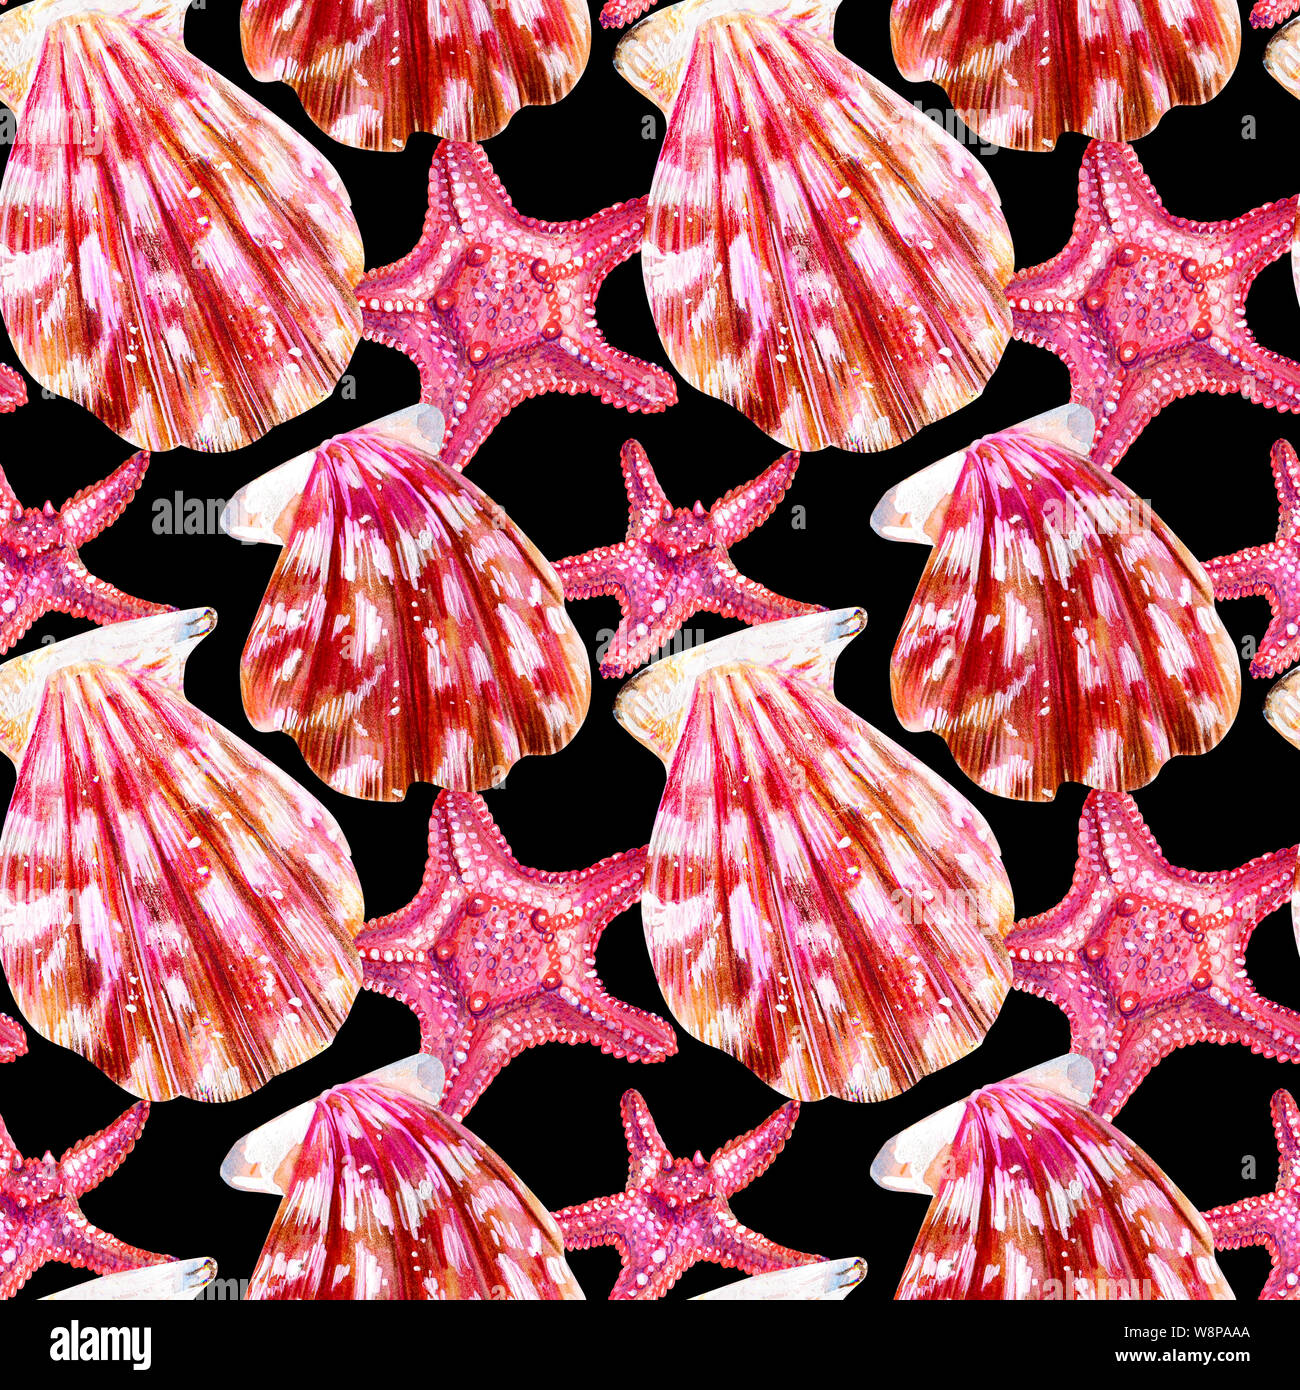 Seamless pattern of scallop shells. Mother of pearl with pink clam Pectinidae and starfish on a black background. Nature of the World Ocean. Summer se Stock Photo